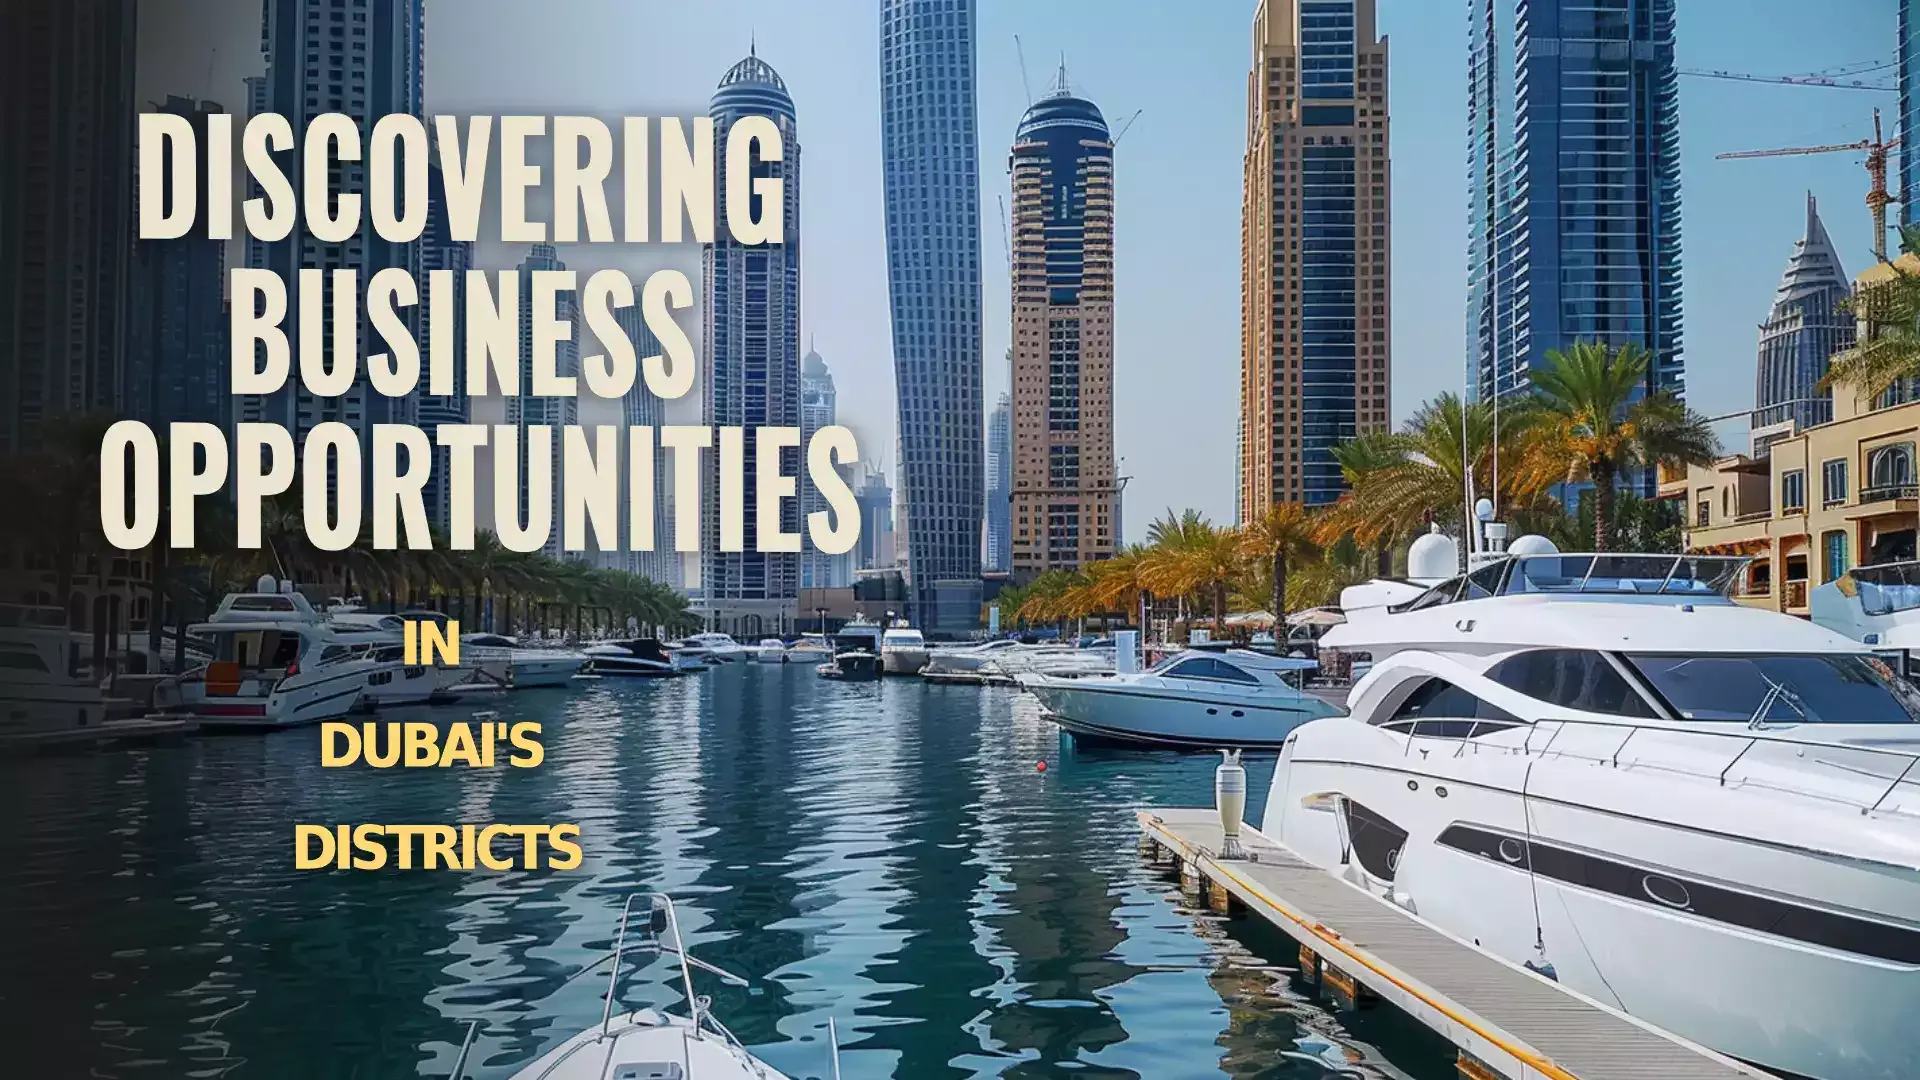 An image showcasing the thriving business environment of Dubai, ripe with opportunities